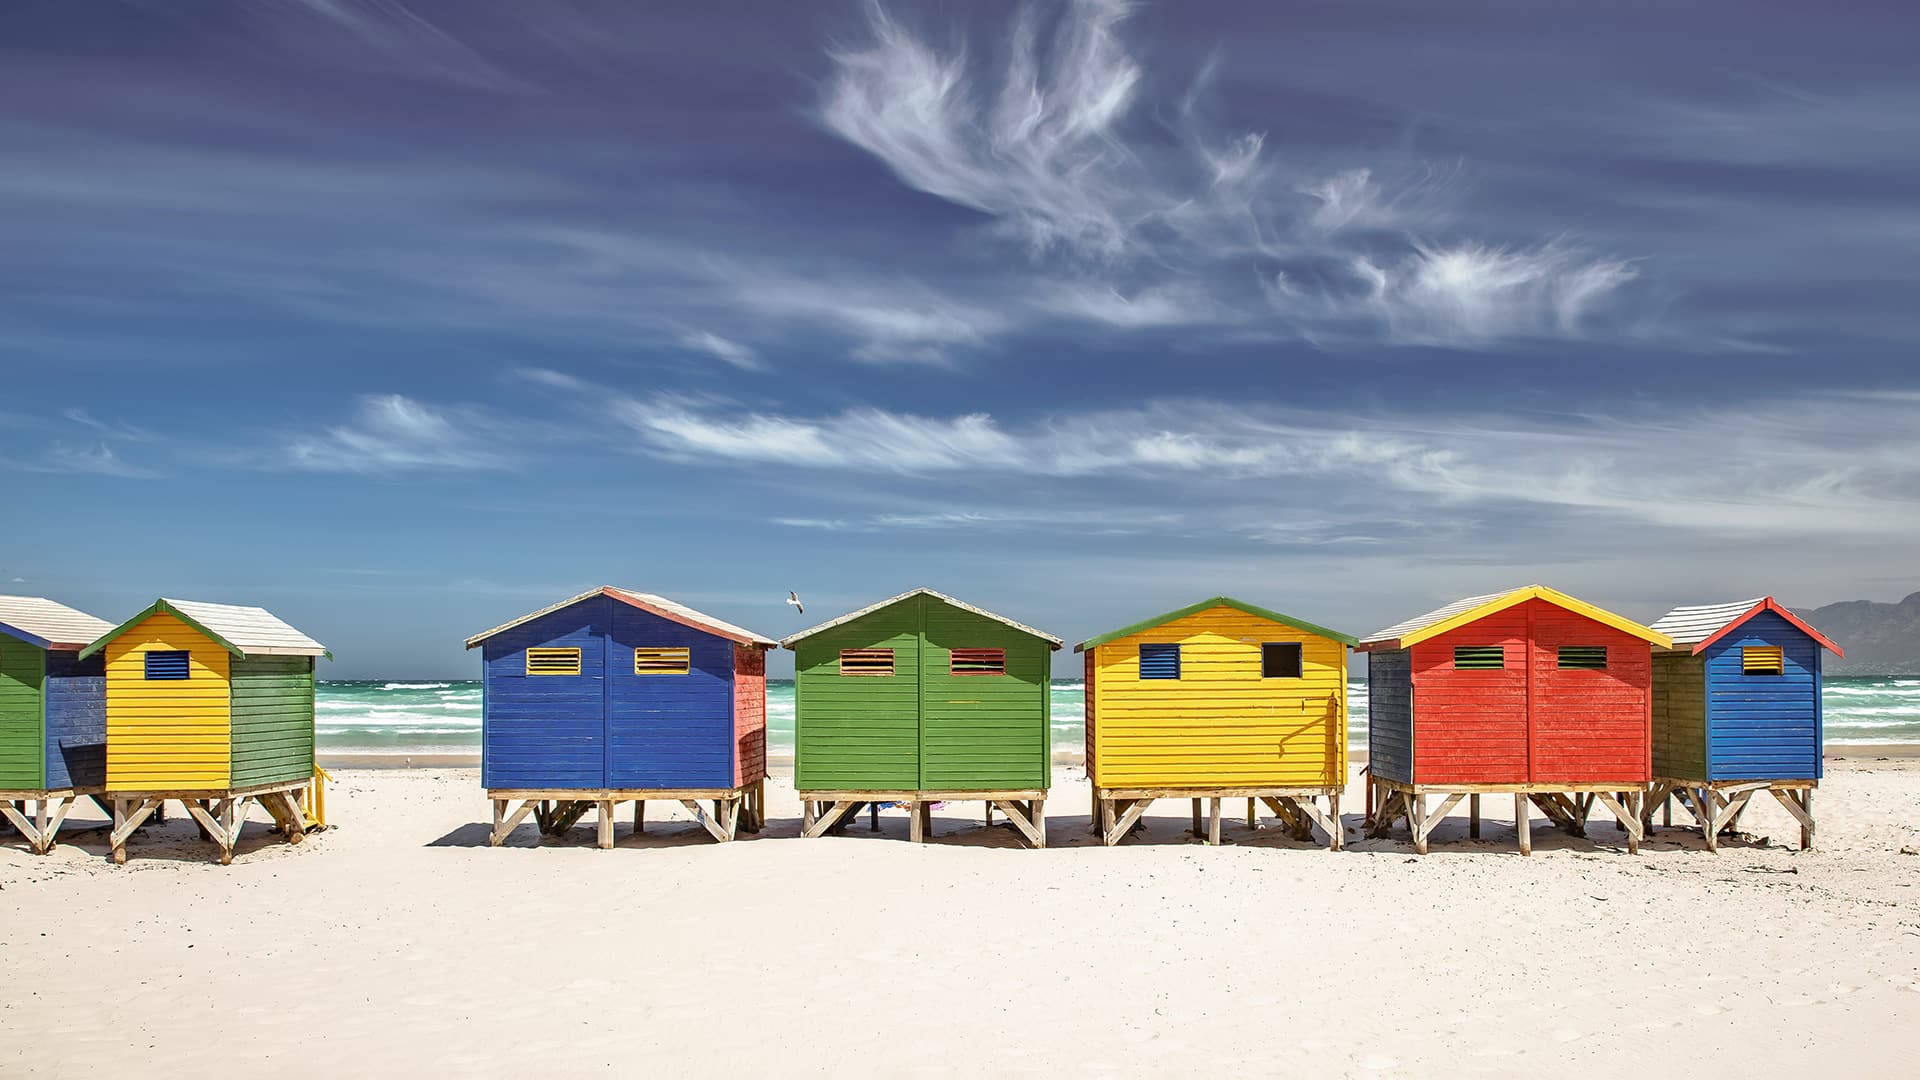 Beach huts in Cape Town, South Africa